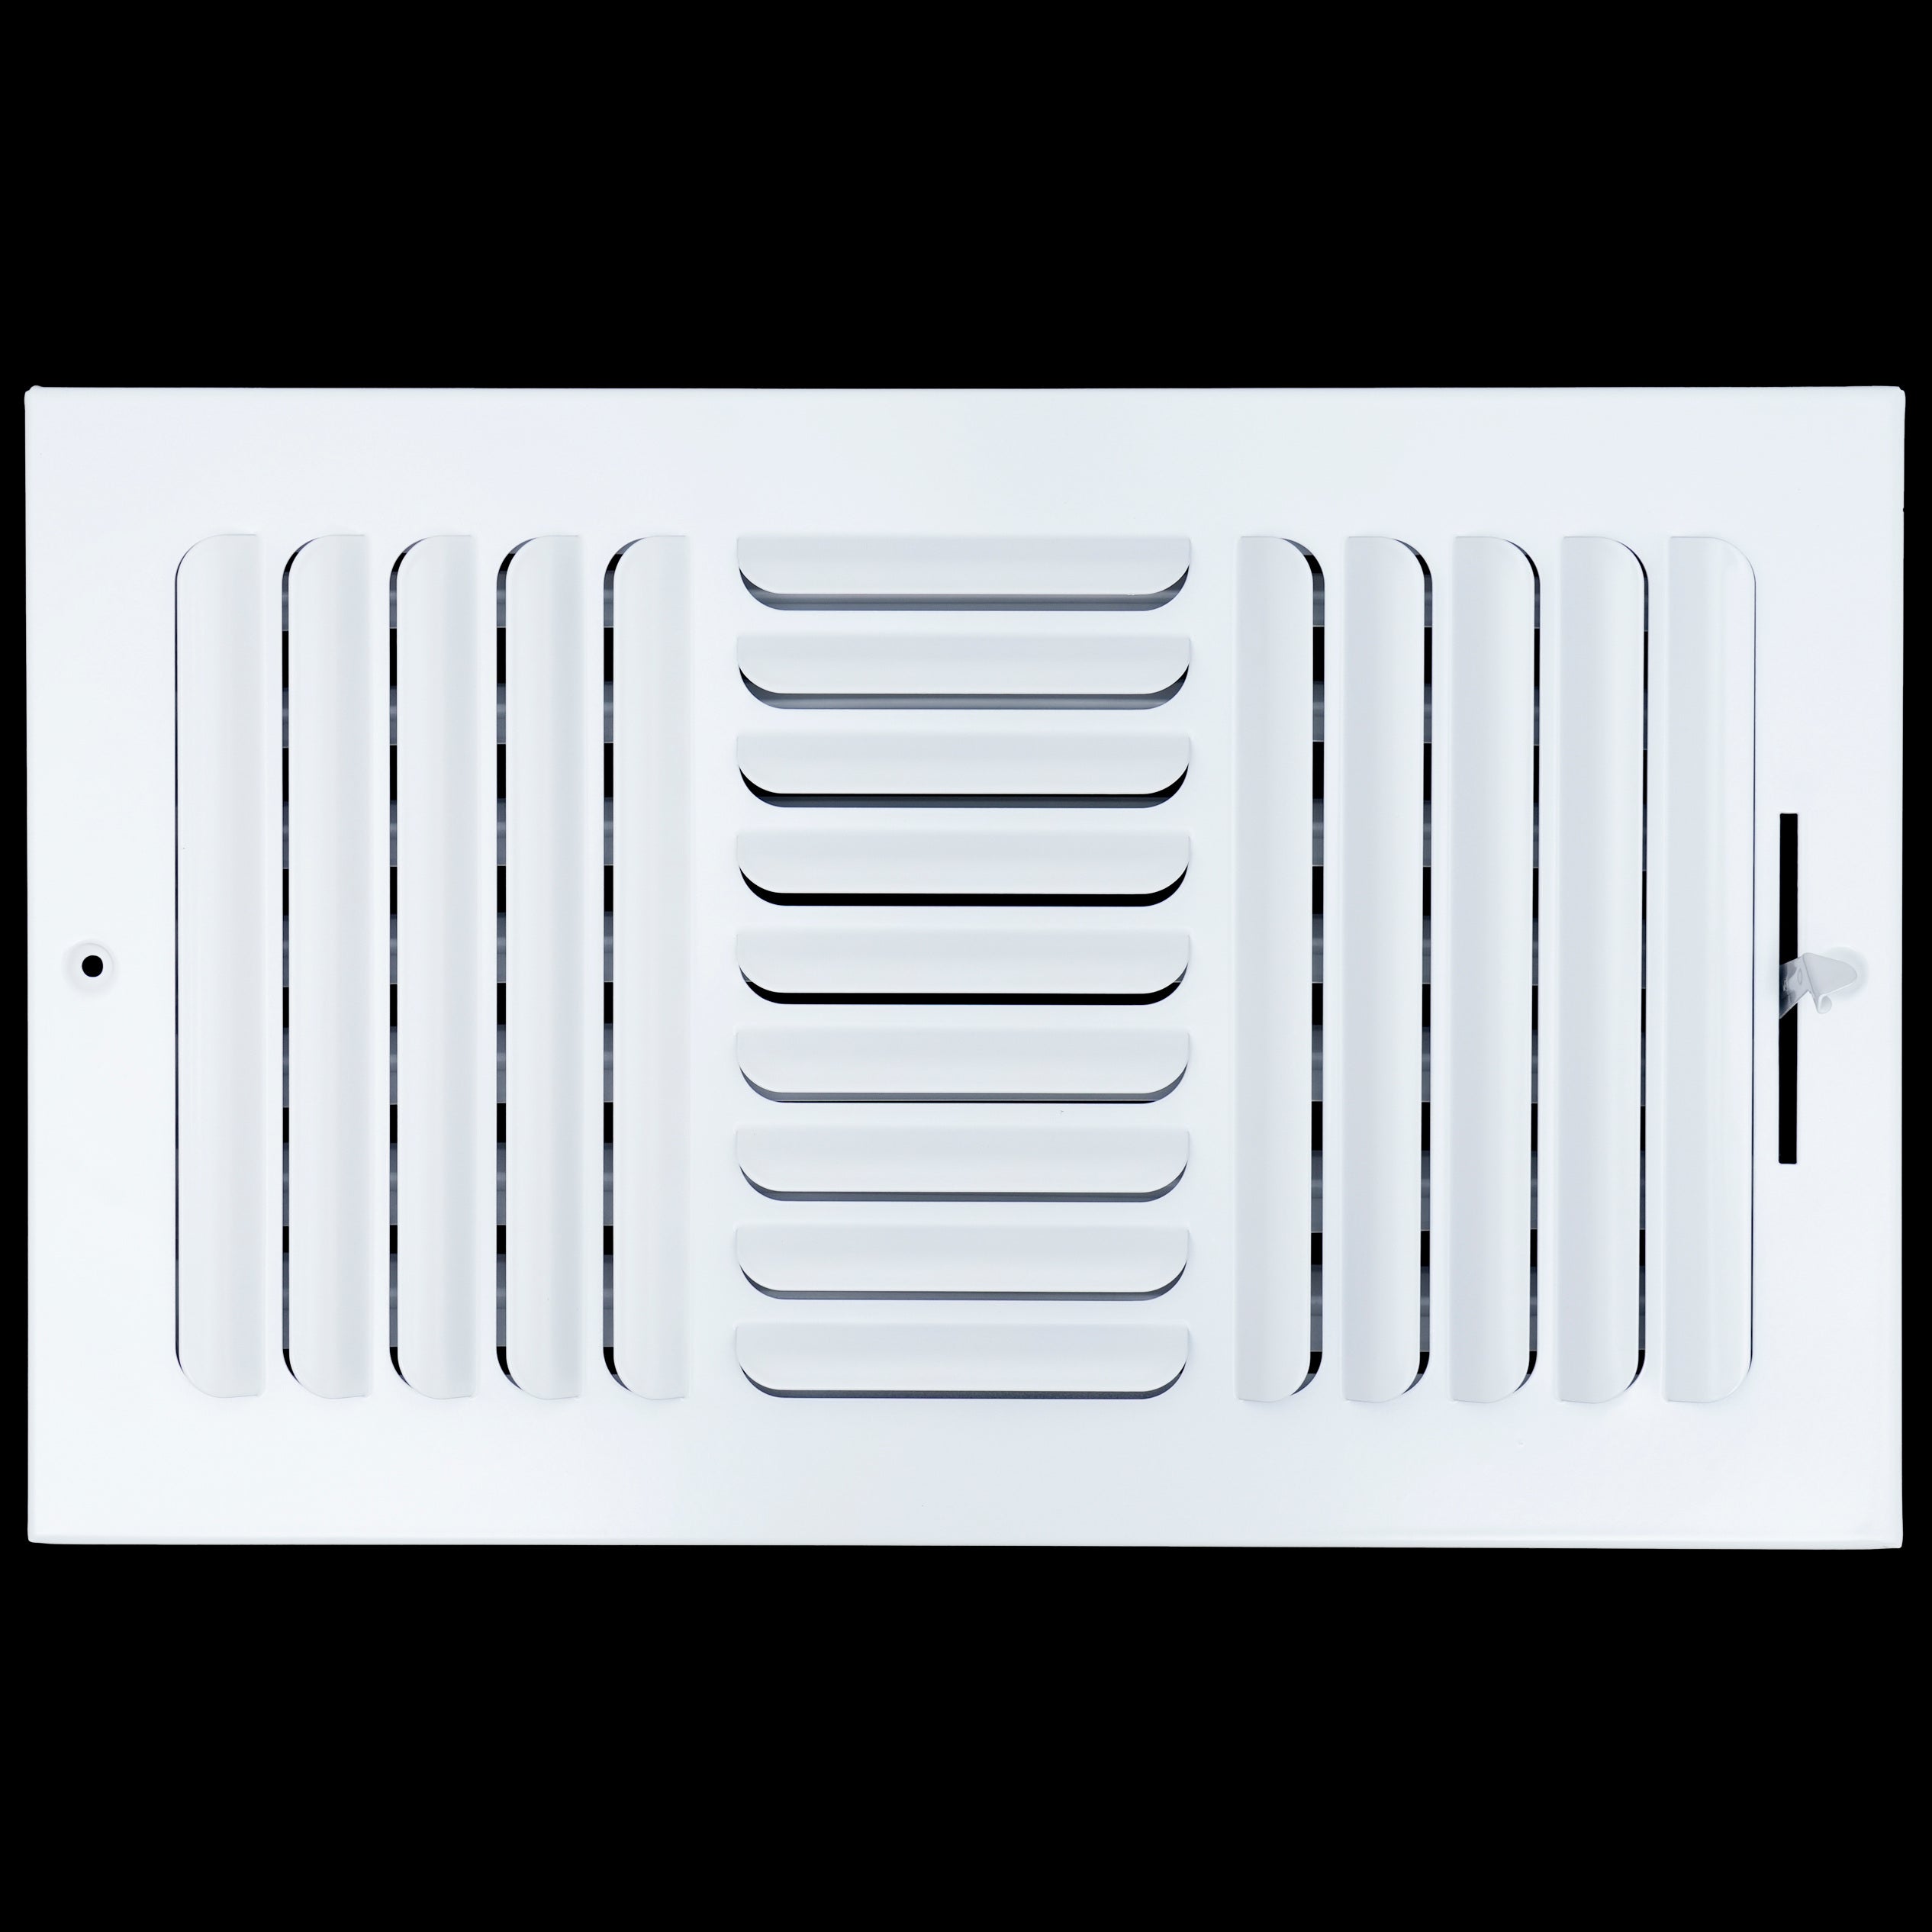 airgrilles 14"w x 8"h 3 way fixed curved blade air supply diffuser  -  register vent cover grill for sidewall and ceiling  -  white  -  outer dimensions: 15.75"w x 9.75"h hnd-cb-wh-3way-14x8  - 1